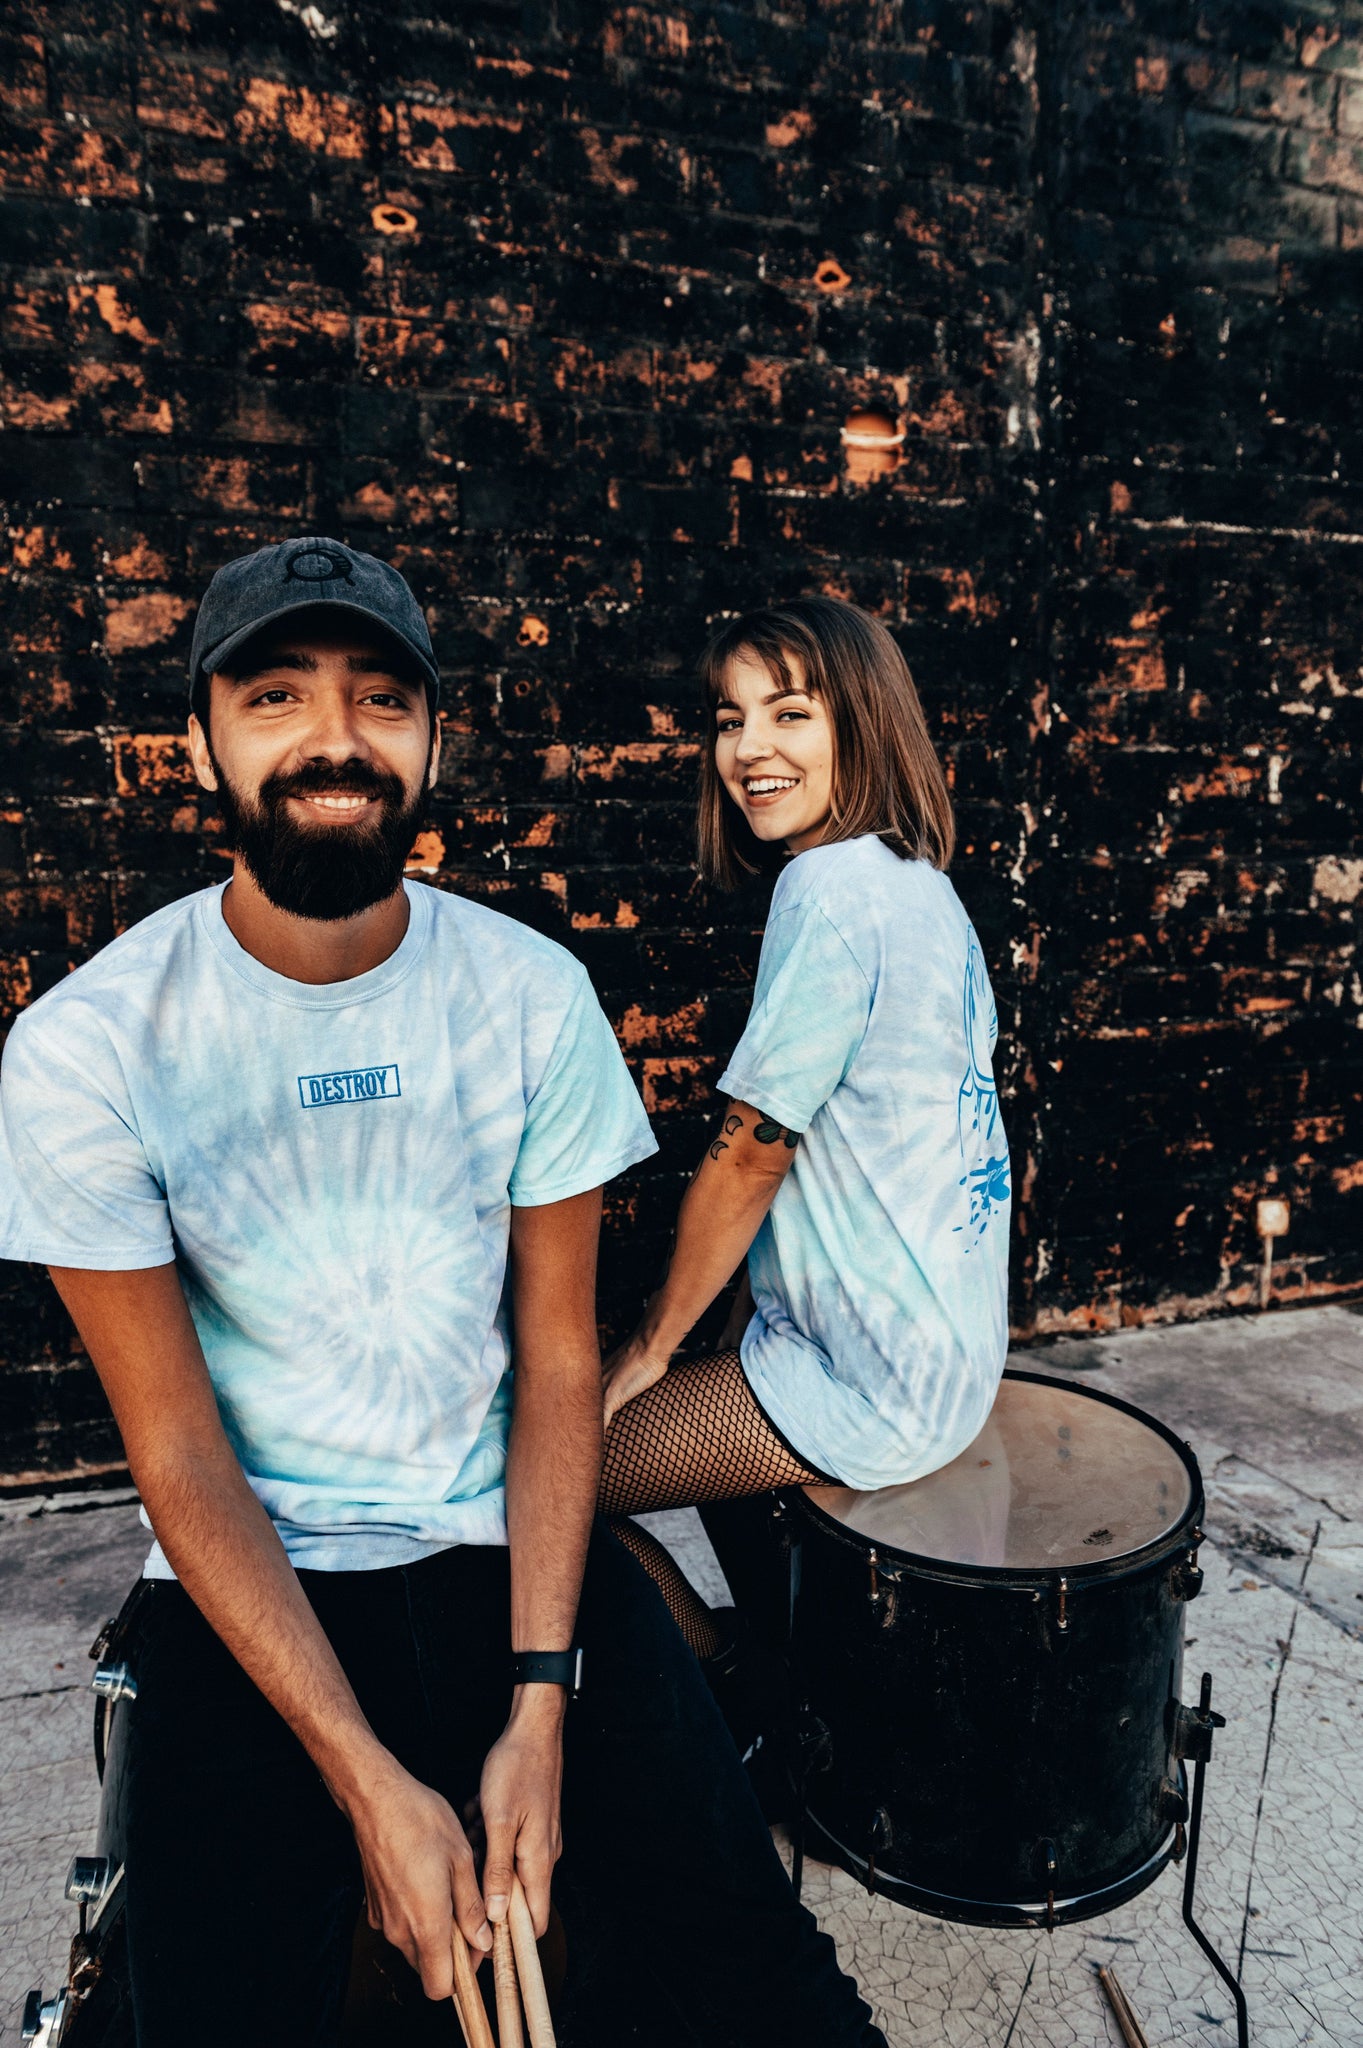 We’re not your average apparel for drummers, marching band students, or drum set players. Drummer’s clothing taken up a notch; Destroy A Drum has a wide selection of drum Tees, drummer's Outerwear, drum performance Headwear, & drumset Accessories with clean cut styles & crazy artwork designs. Shop the best in drum clothing and drummer's outfits for any kind of drummer. Drummer's apparel made with drum designs including t-shirts, hoodies, baseball tees, & more. Drum clothing that speaks for your character & personality on & off the stage; whether you're a drummer, percussionist, in marching band, or representing your passion through our company motto. Destroy A Drum has the drum gear to make you ready to DESTROY